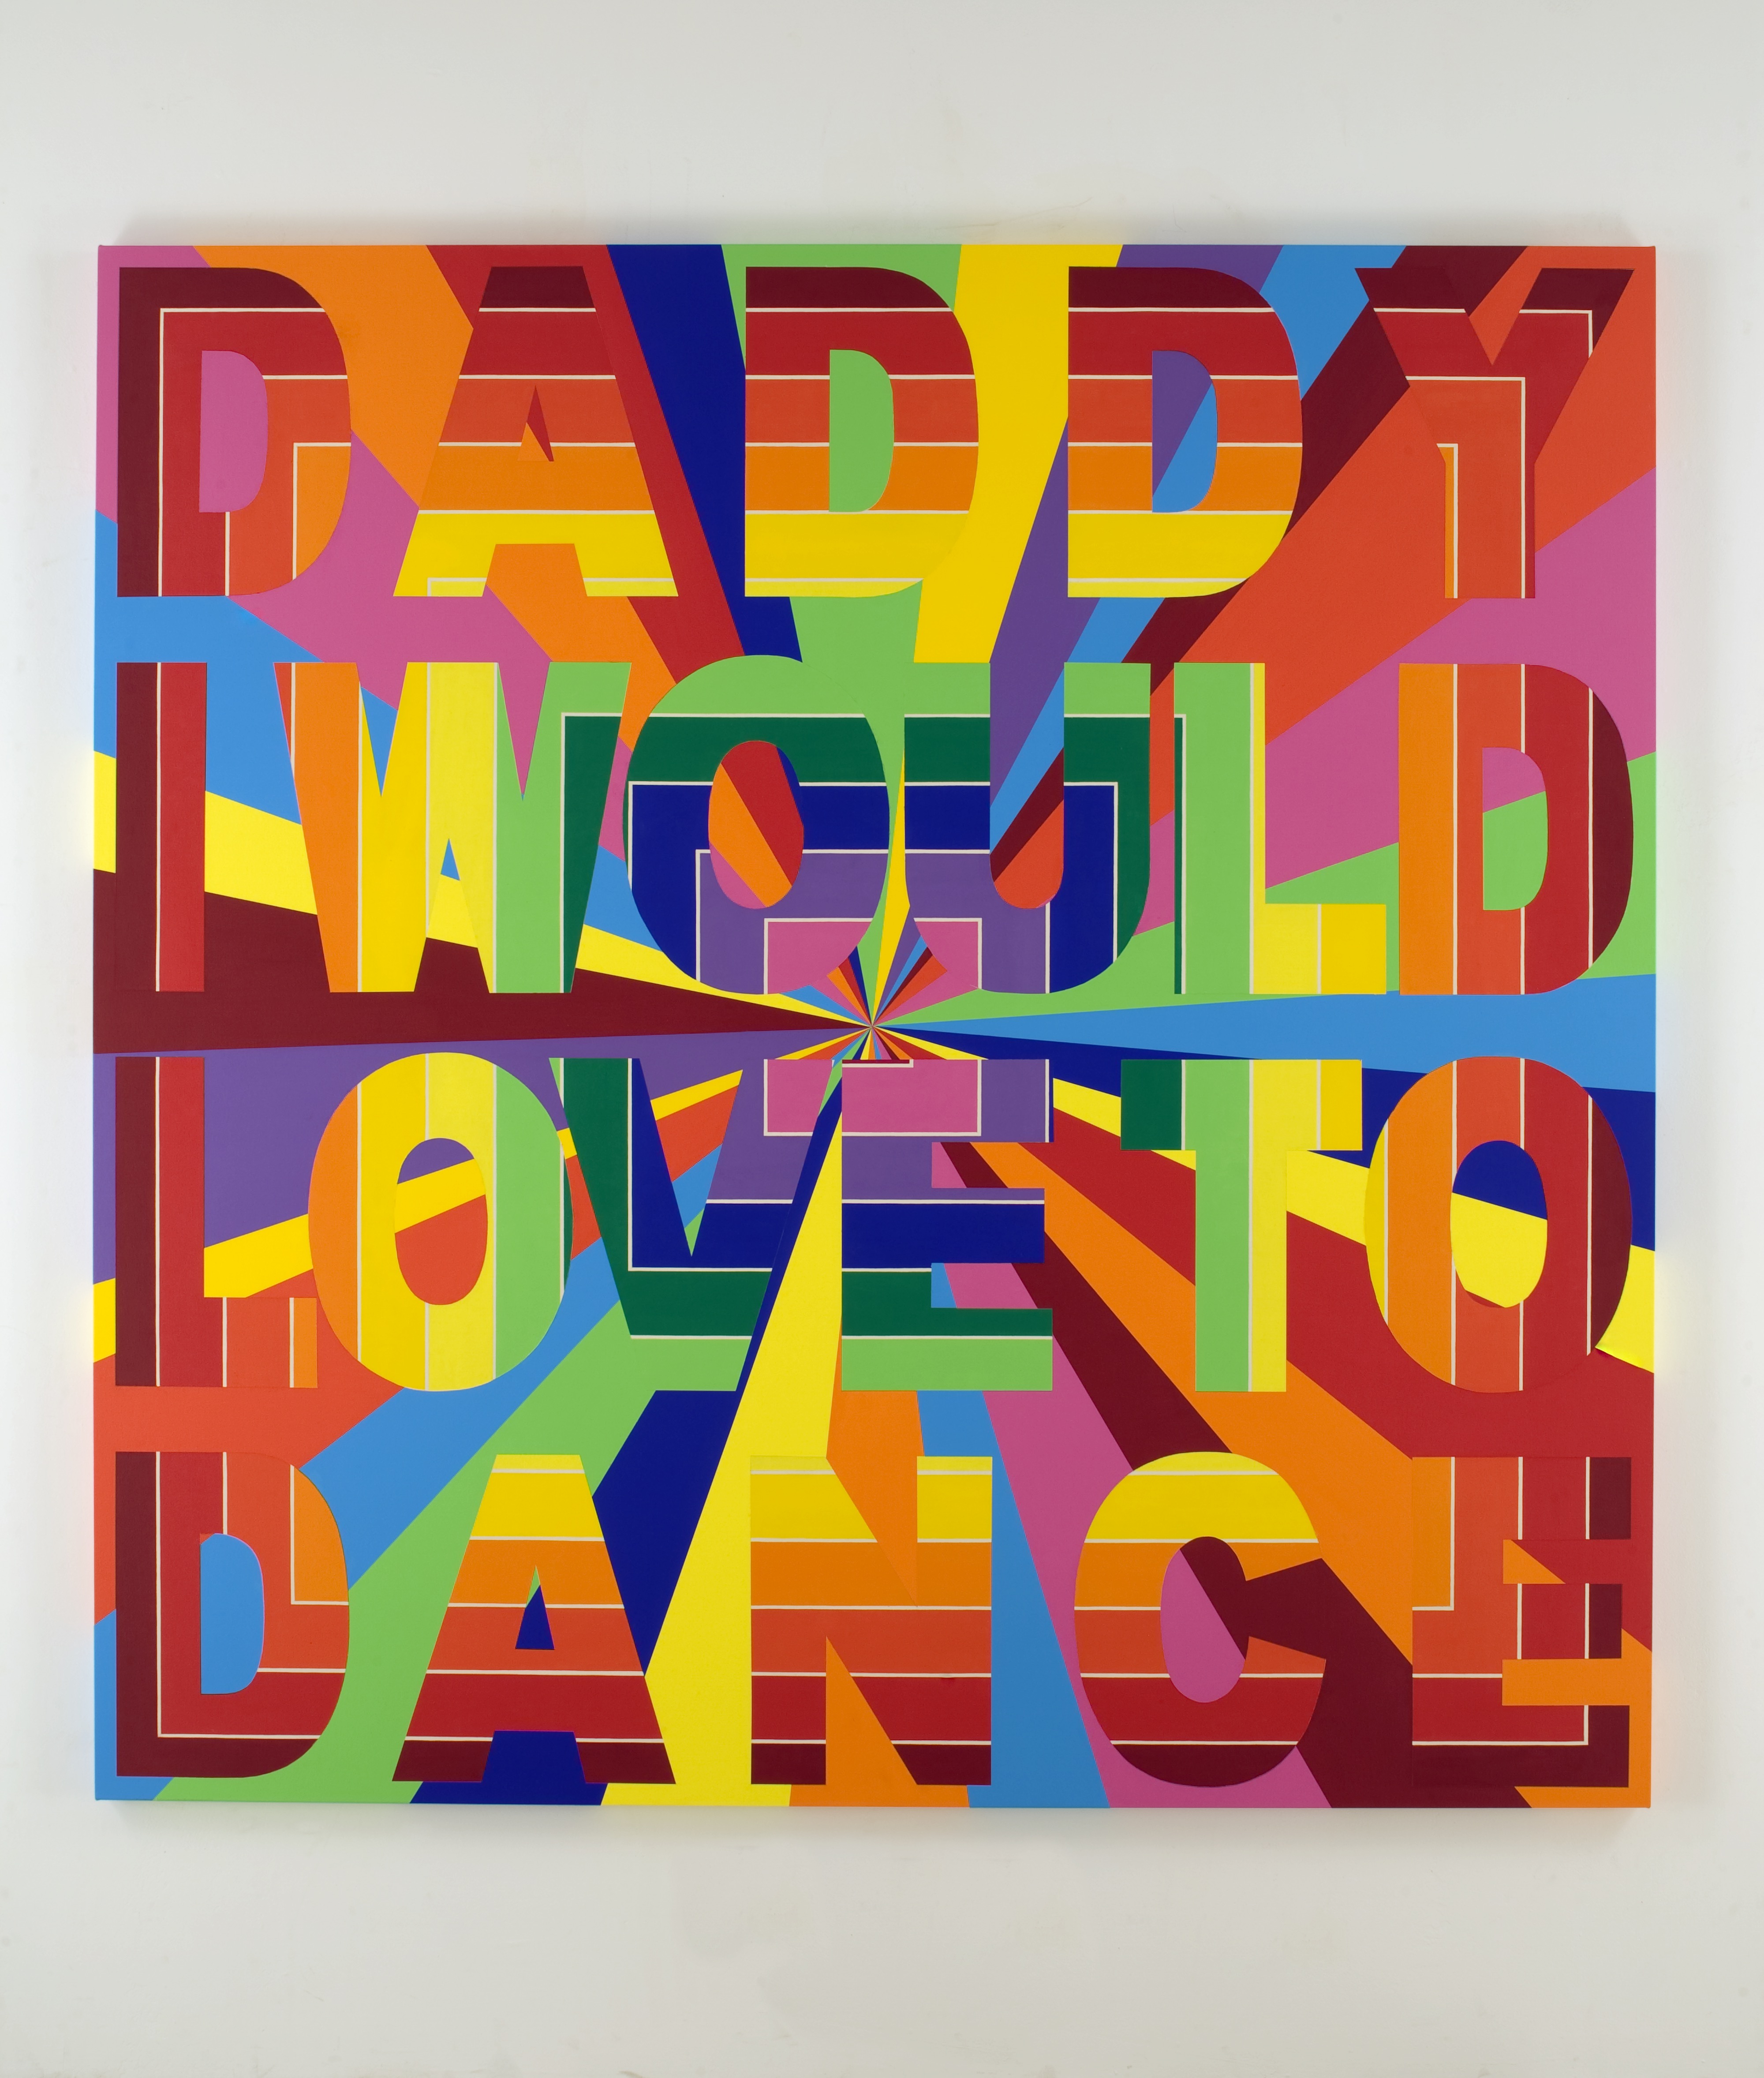 Deborah Kass, Daddy I Would Love to Dance, 2008, Acrylic on canvas, 78 x 78 in. Courtesy of the artist. VoCA. About Face.